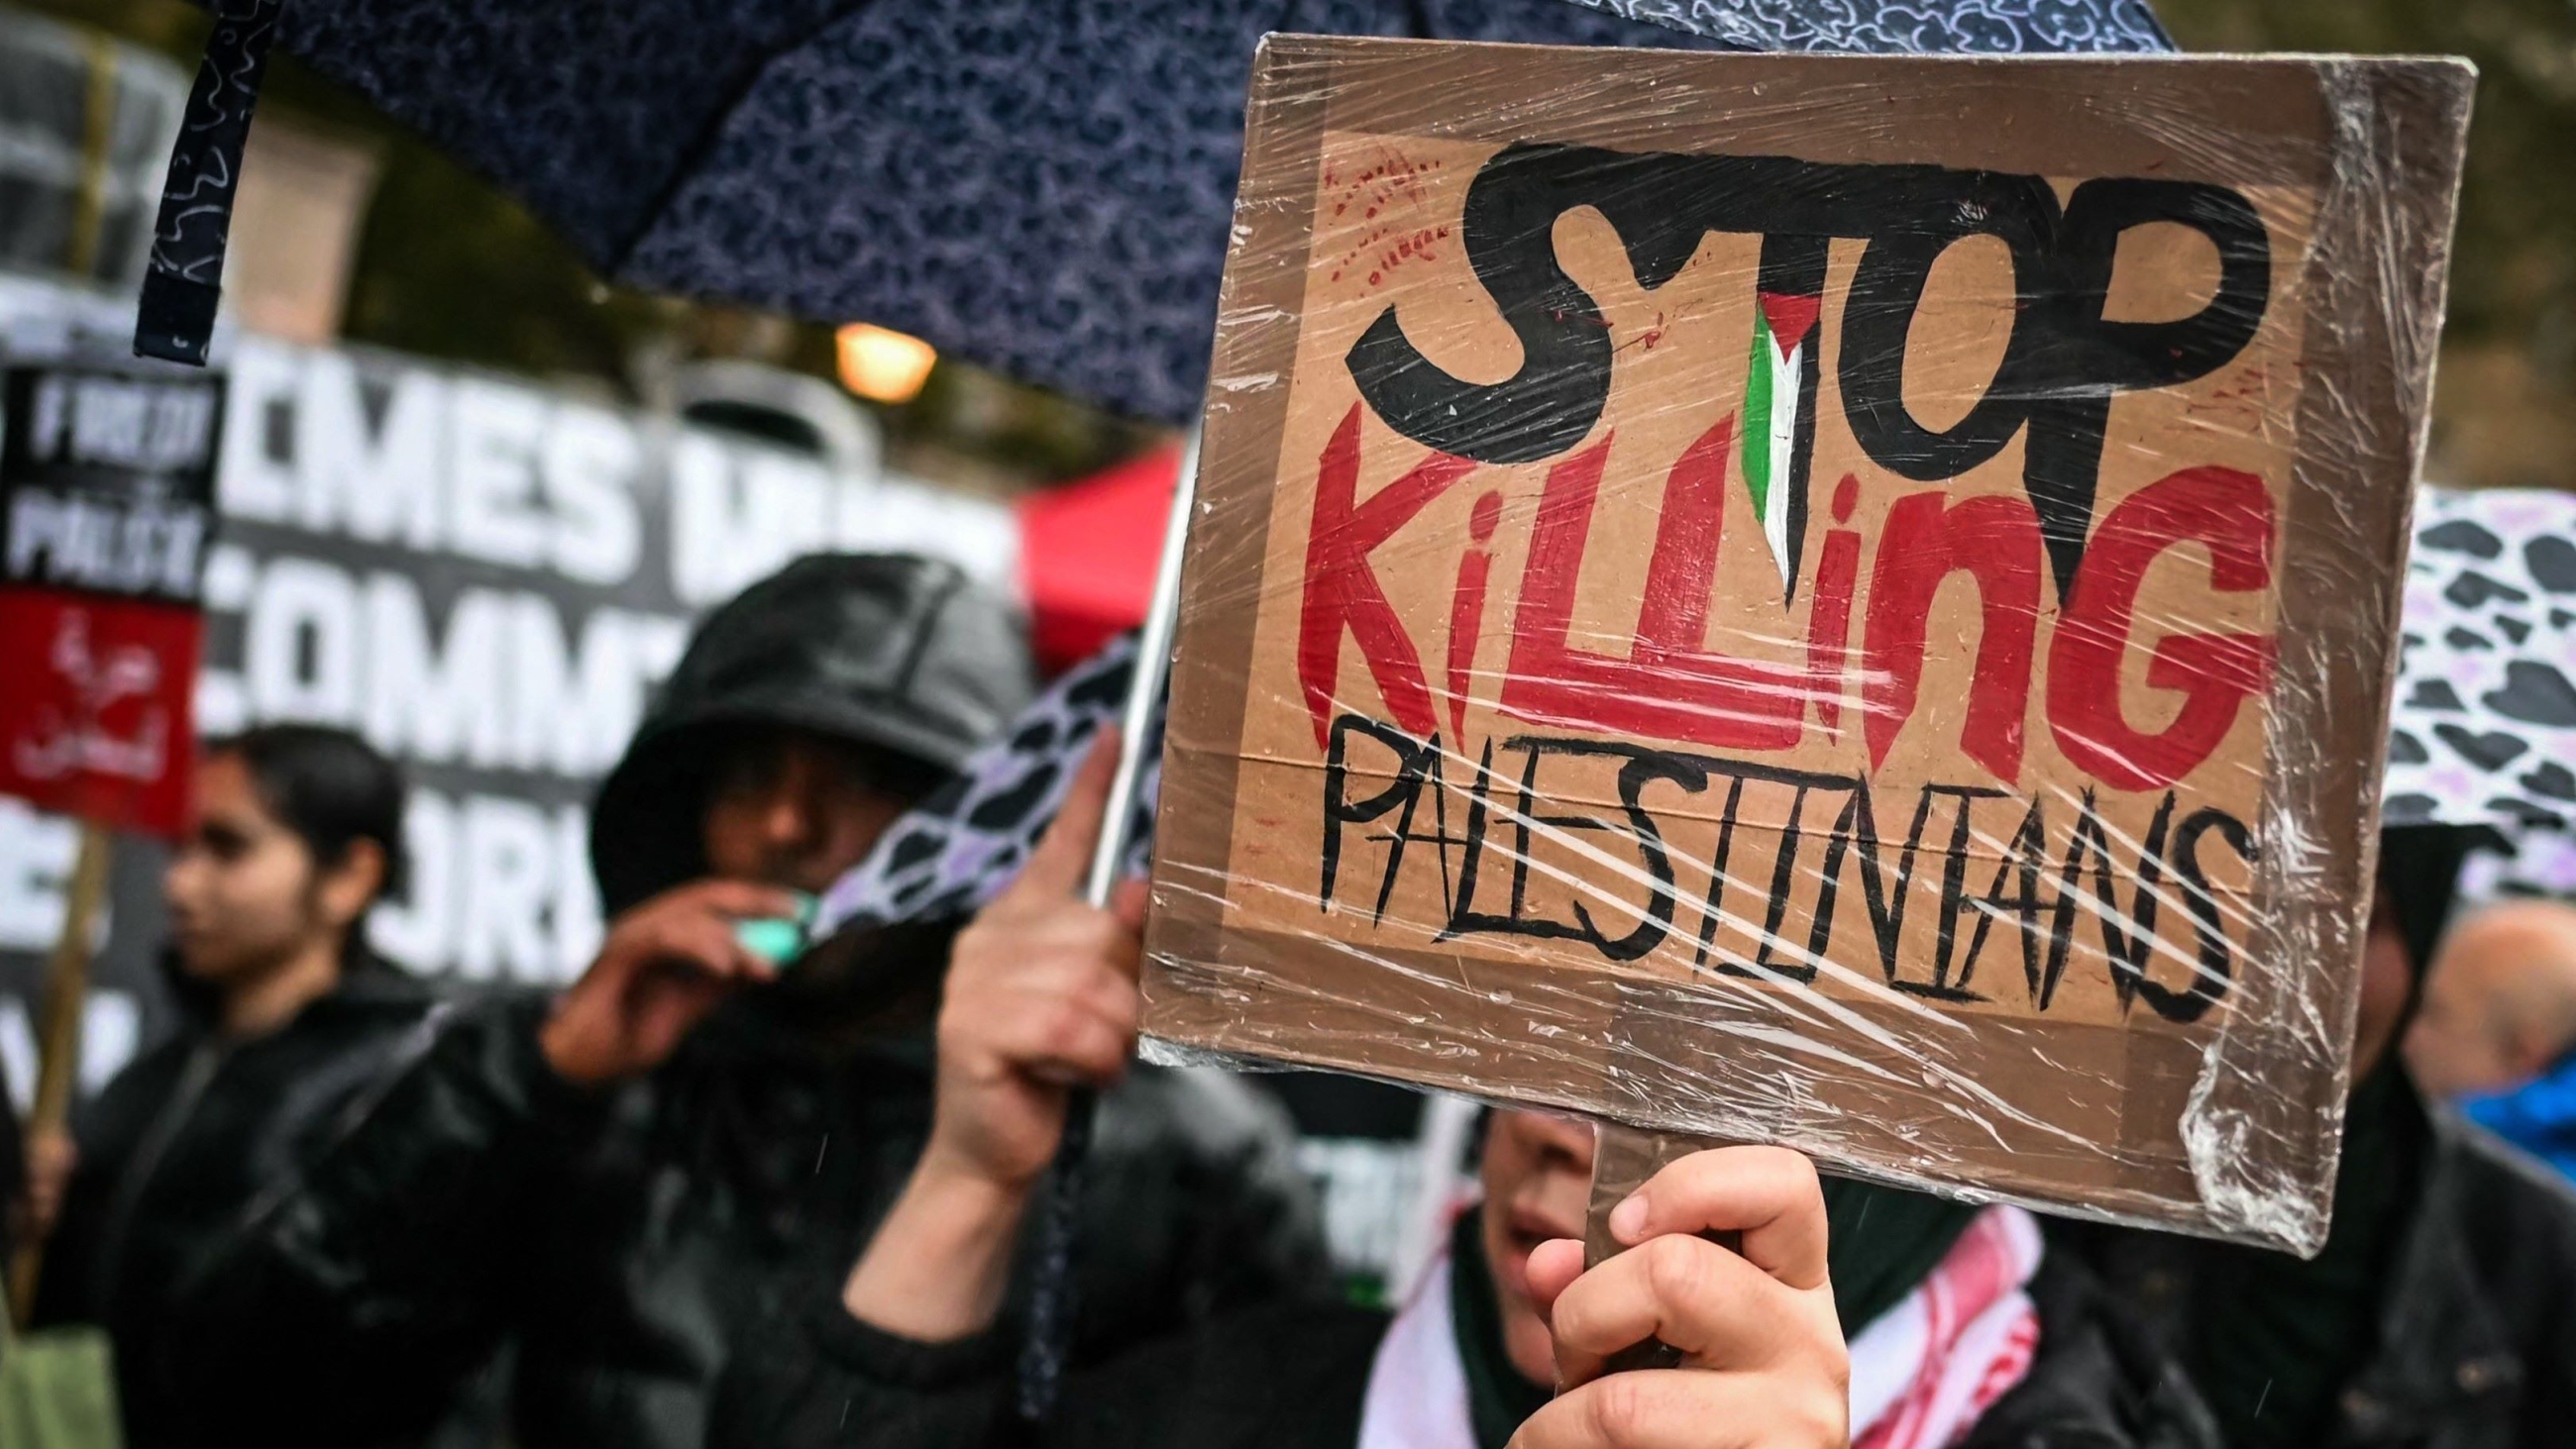 A protester holds a banner during a vigil in support of Palestinians in Gaza outside Downing Street on 18 October (Justin Tallis/AFP)